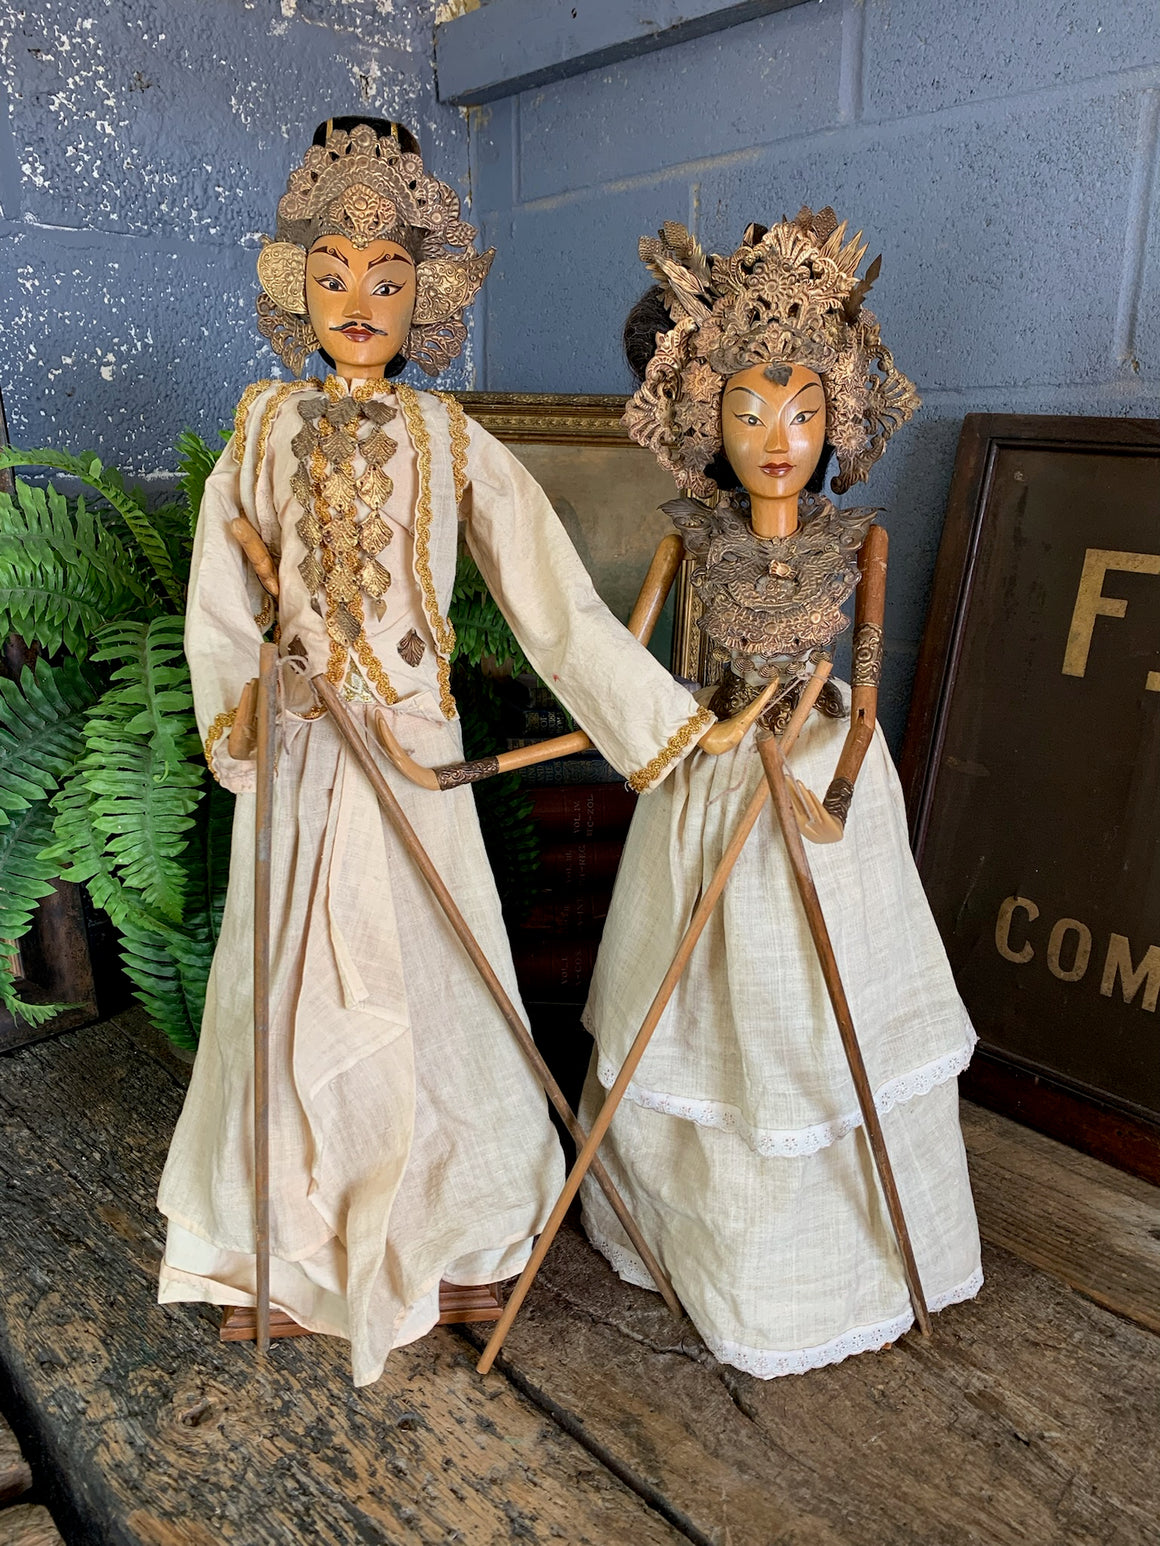 A pair of wooden Balinese marionettes